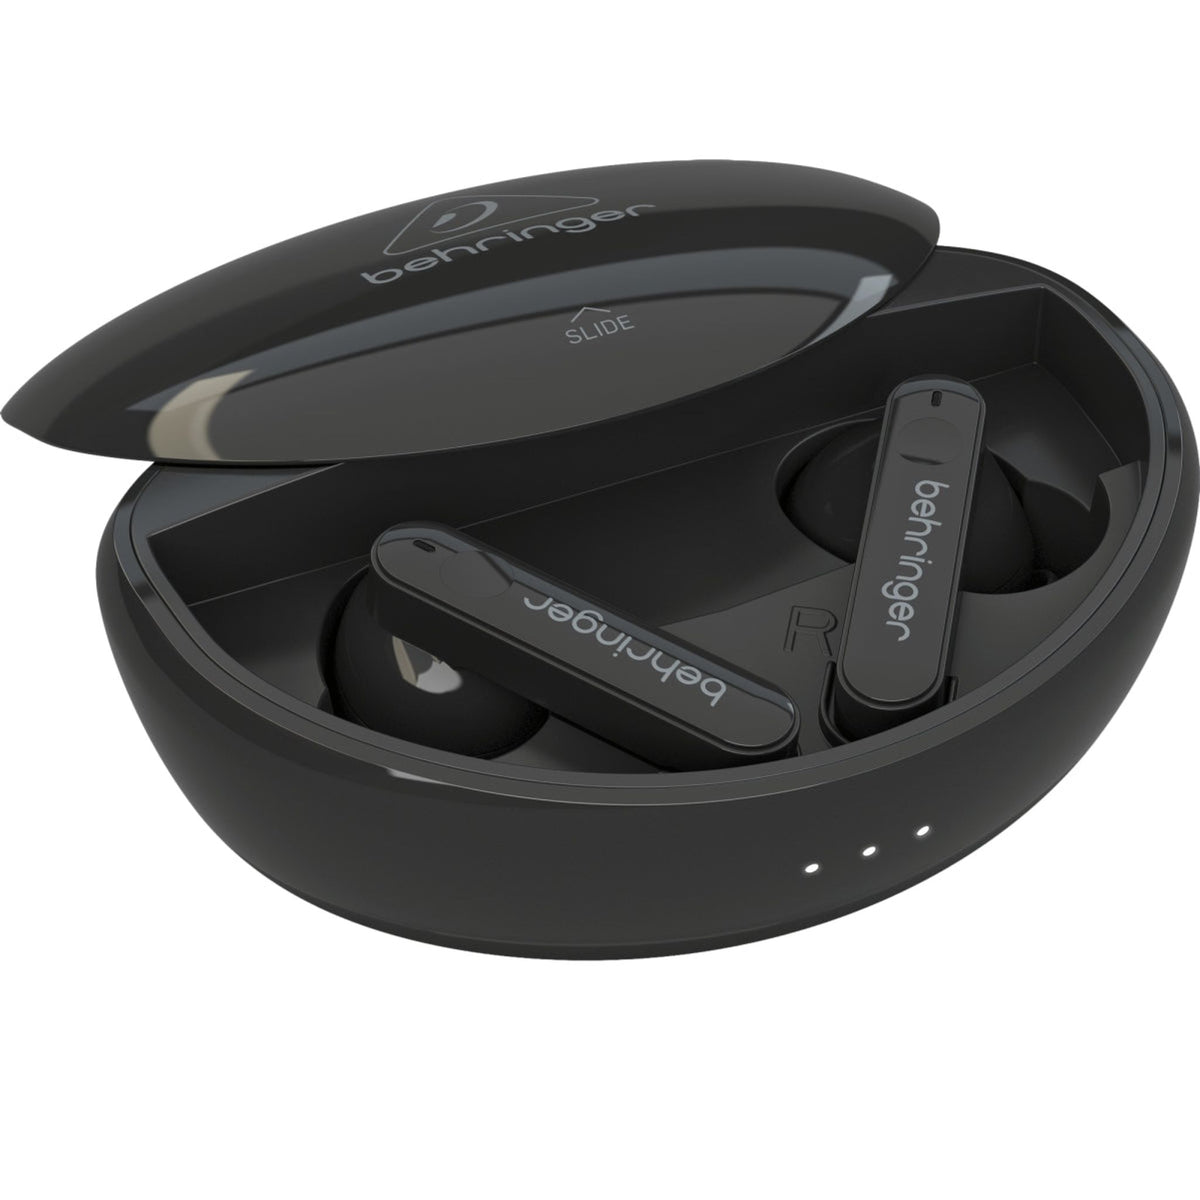 Behringer T-BUDS Noise Cancelling Wireless Earbuds